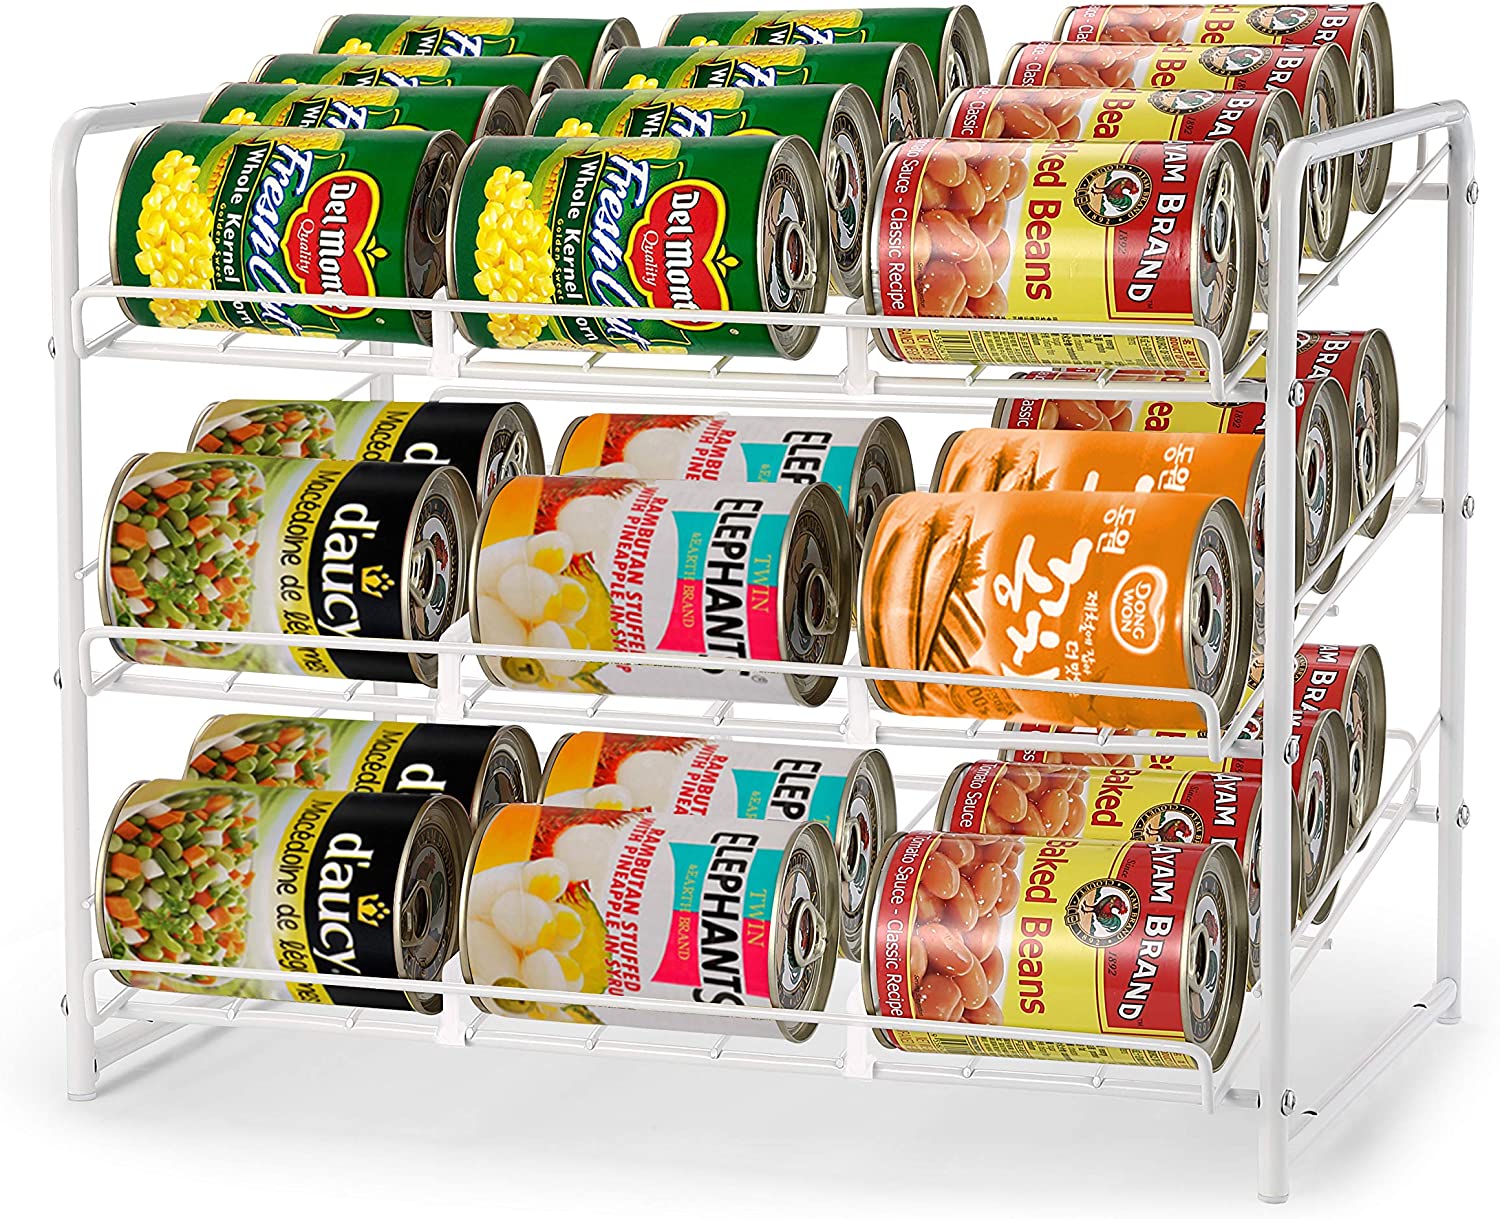 https://bigbigmart.com/wp-content/uploads/2022/01/Simple-Trending-Can-Rack-Organizer-Stackable-Can-Storage-Dispenser-Holds-up-to-36-Cans-for-Kitchen-Cabinet-or-Pantry-White.jpg